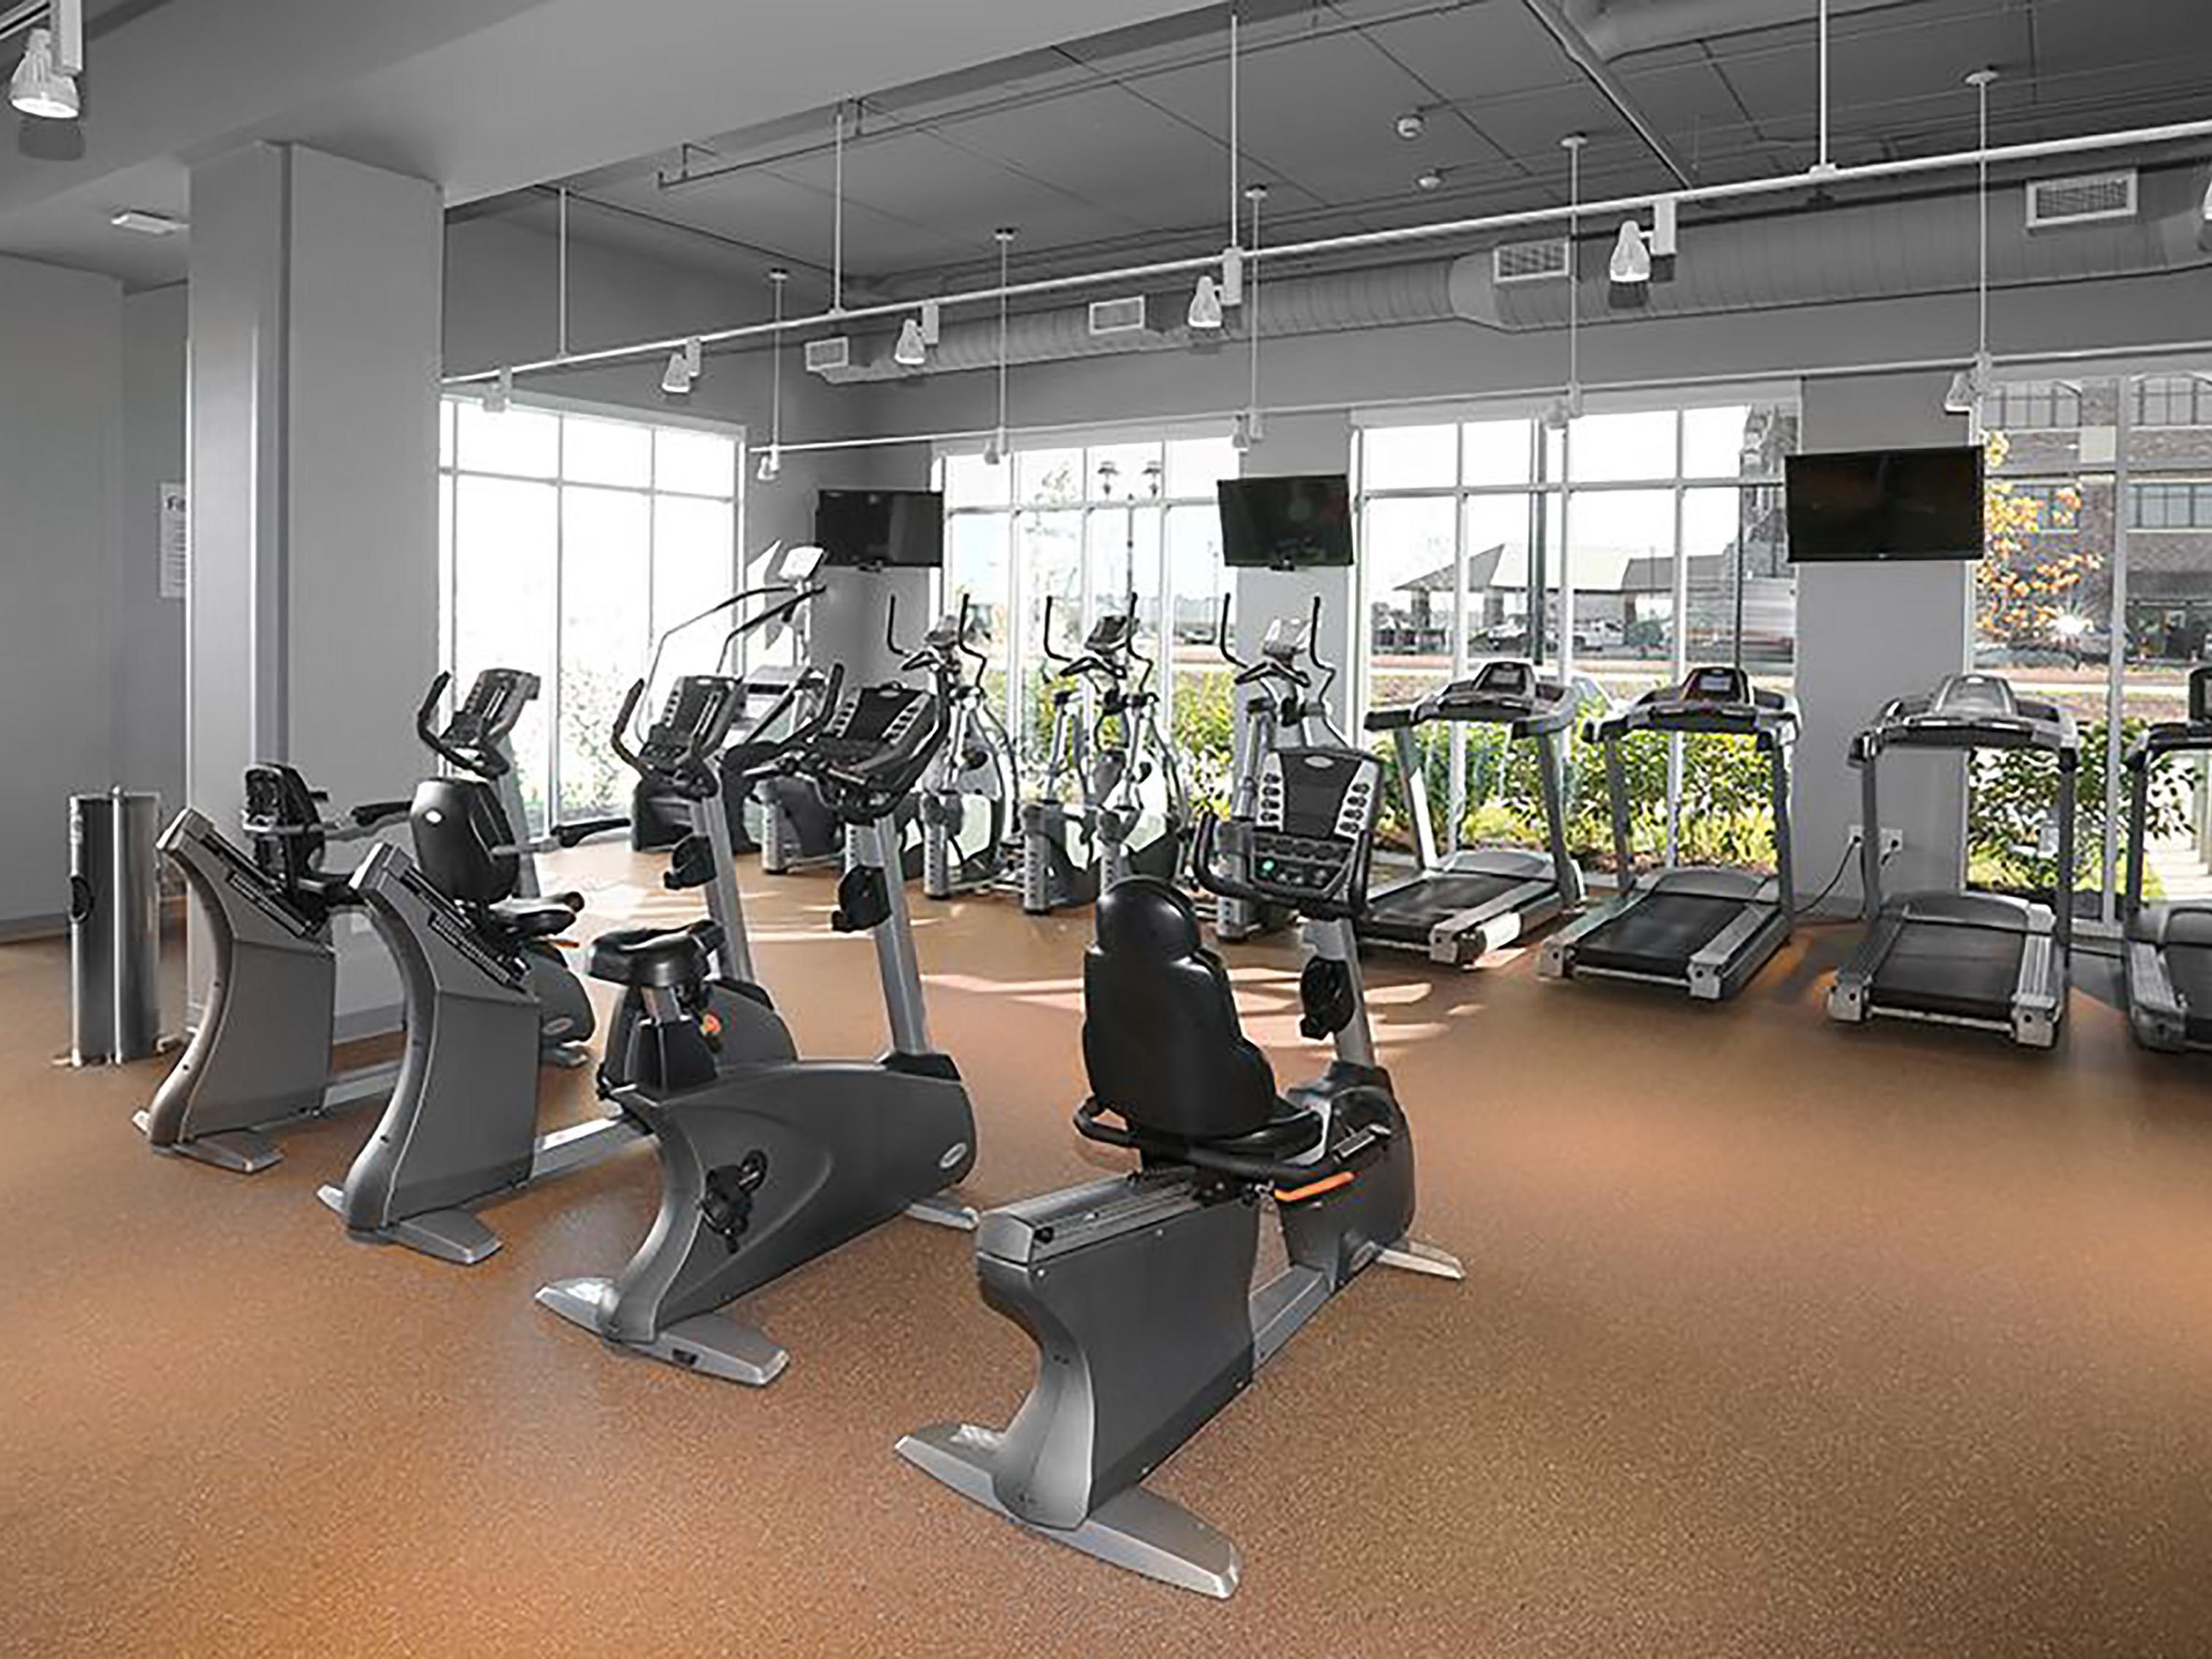 You chose the health conscious lifestyle, so we created the fitness facility with you in mind.  We set the mood with an airy design accompanied by plenty of natural light.  In order to help you keep up with your fitness-centric regimens, we have provided an extraordinary amount of cardio and weight training equipment.  Extra space for yoga, too!